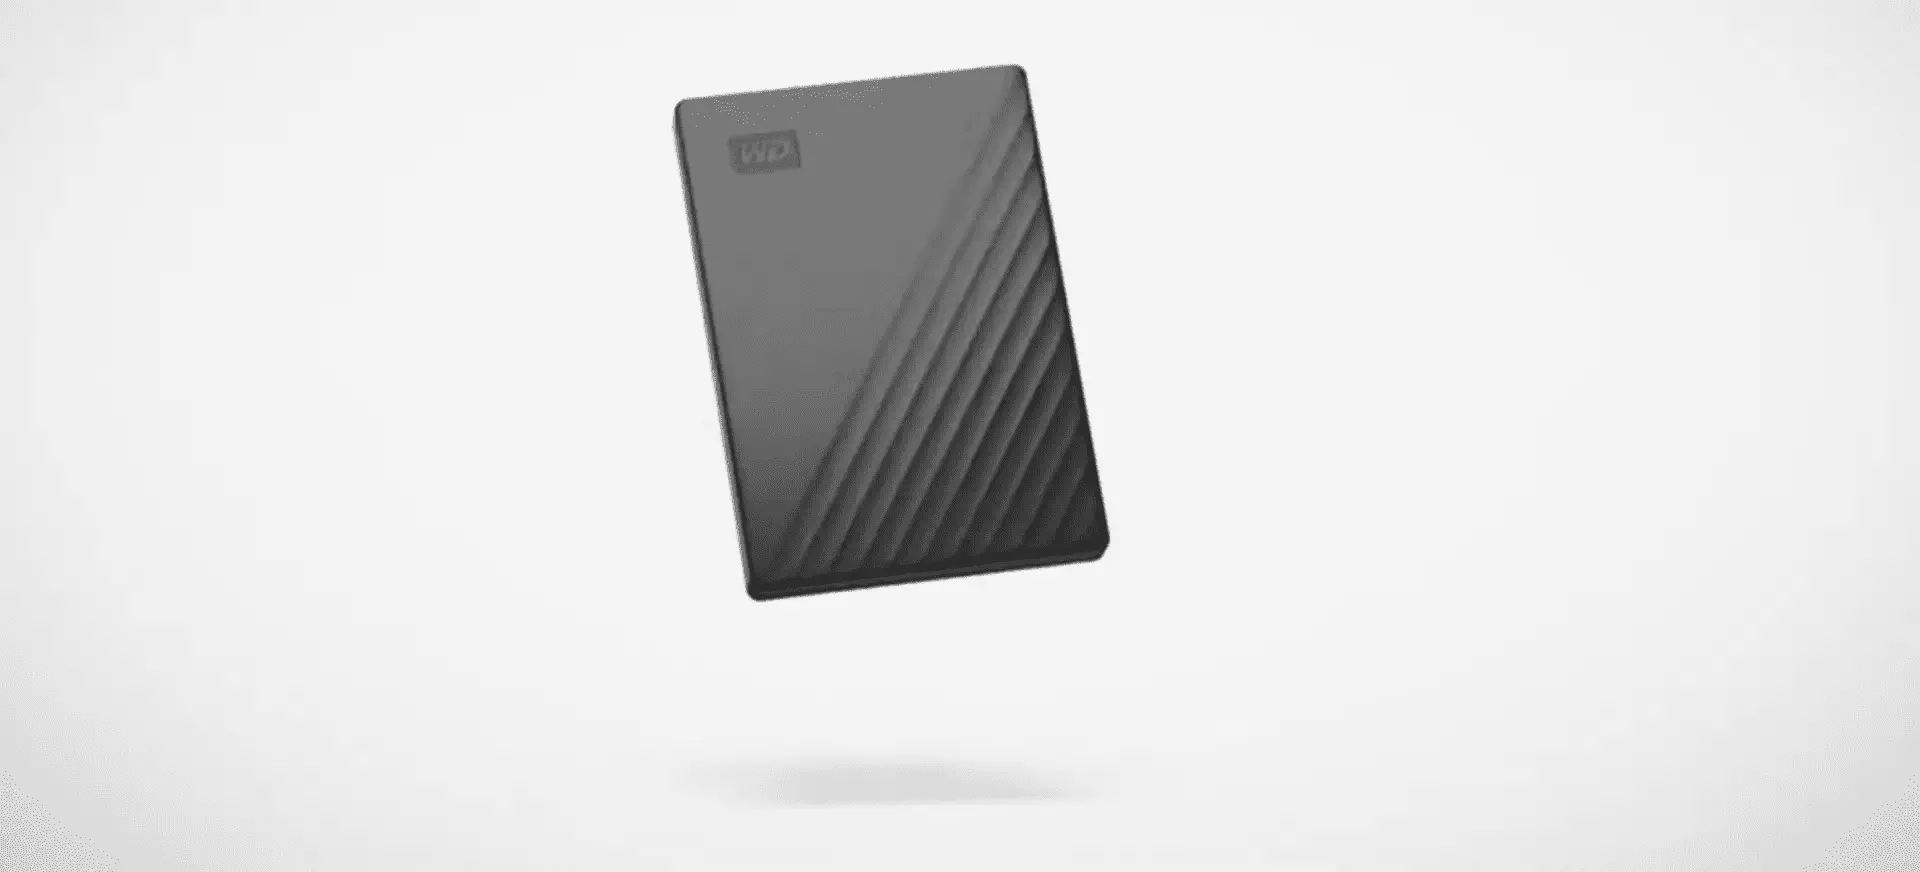 Recommended External Hard Drives for Samsung TVs